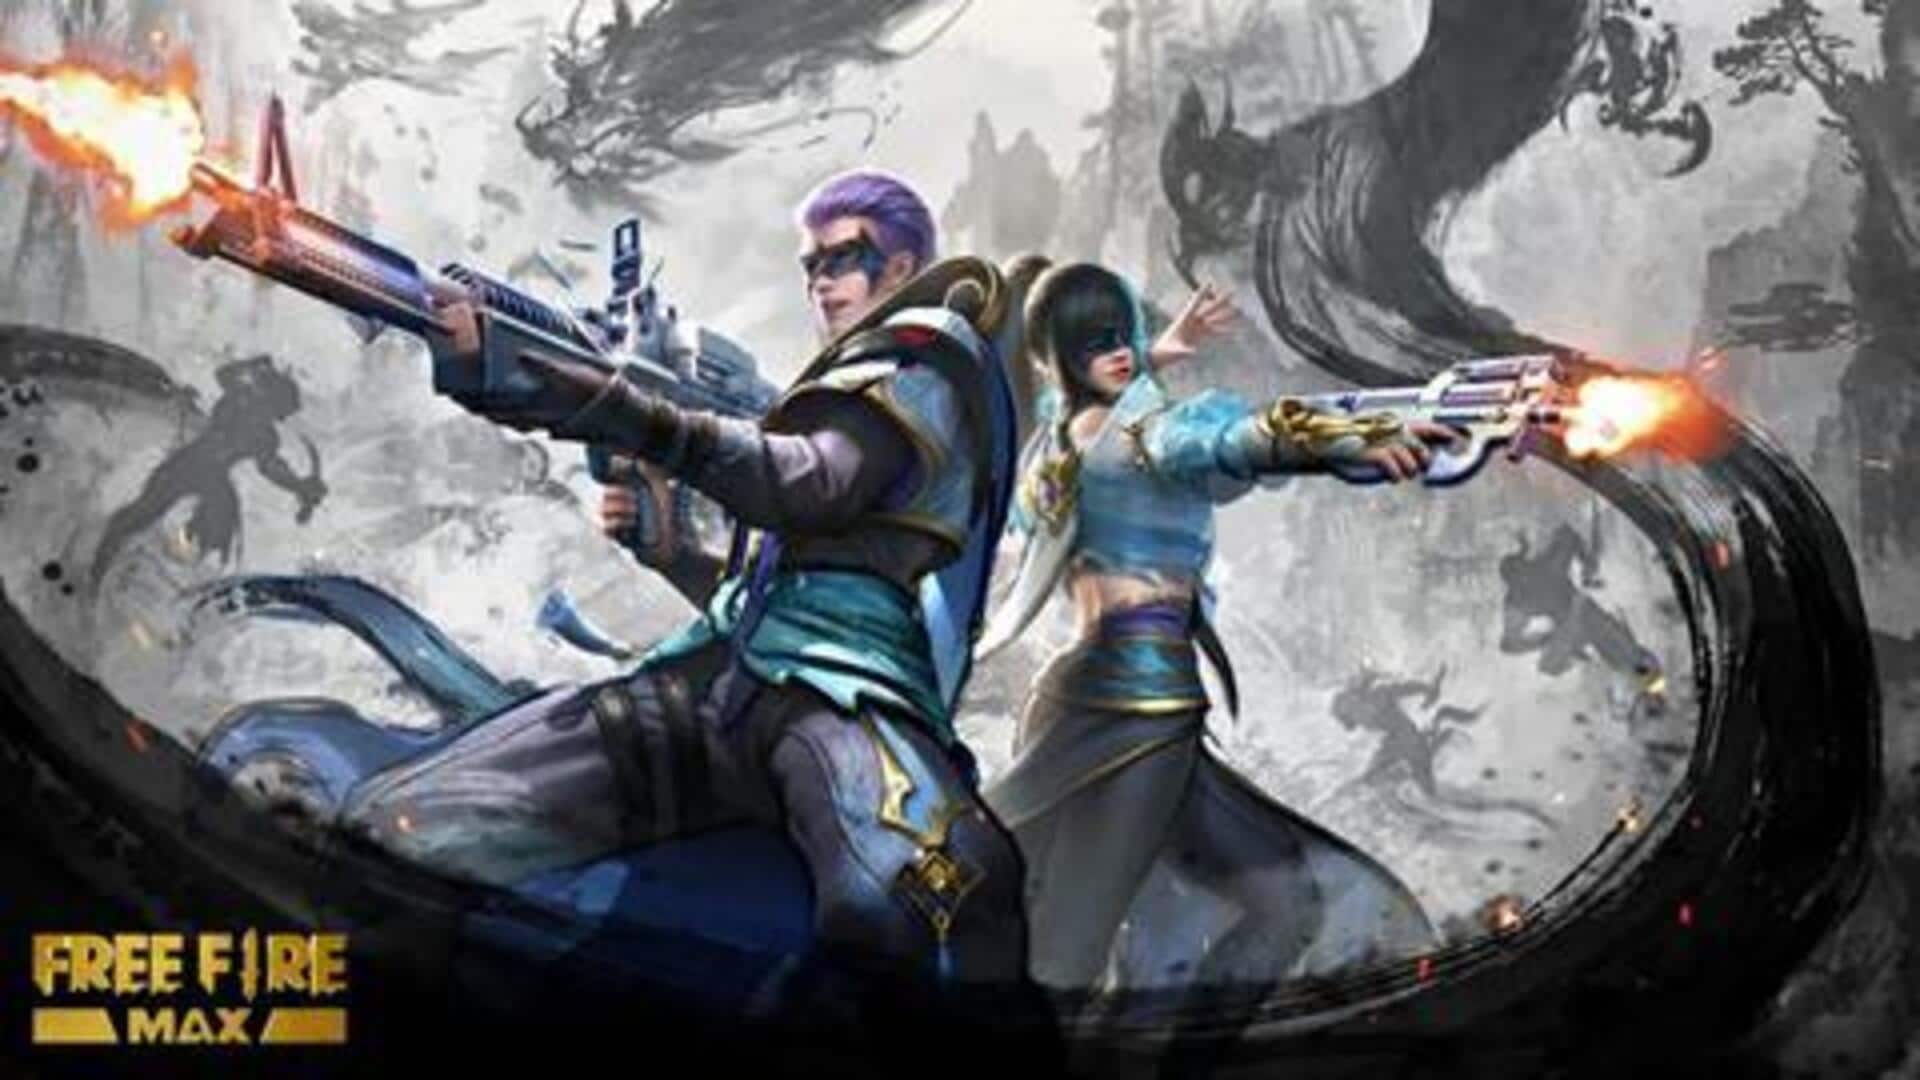 Garena Free Fire MAX June 4 codes: How to redeem